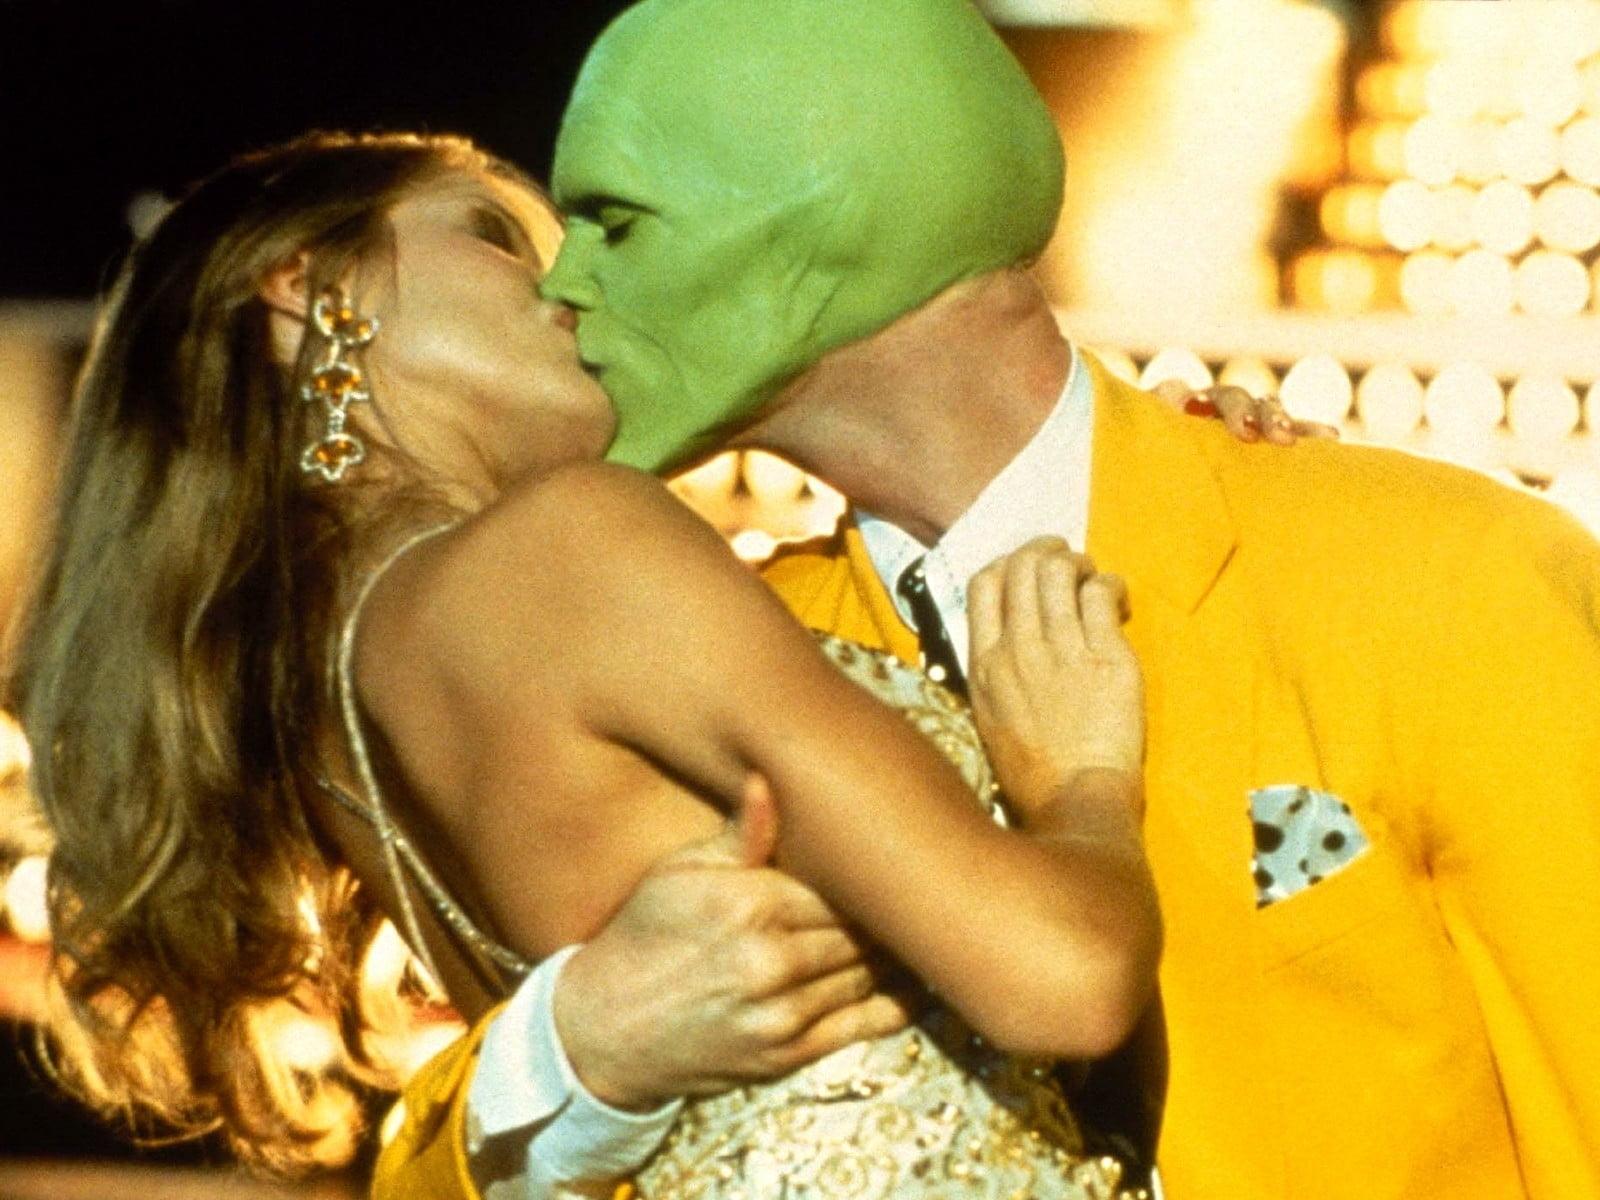 The Mask movie